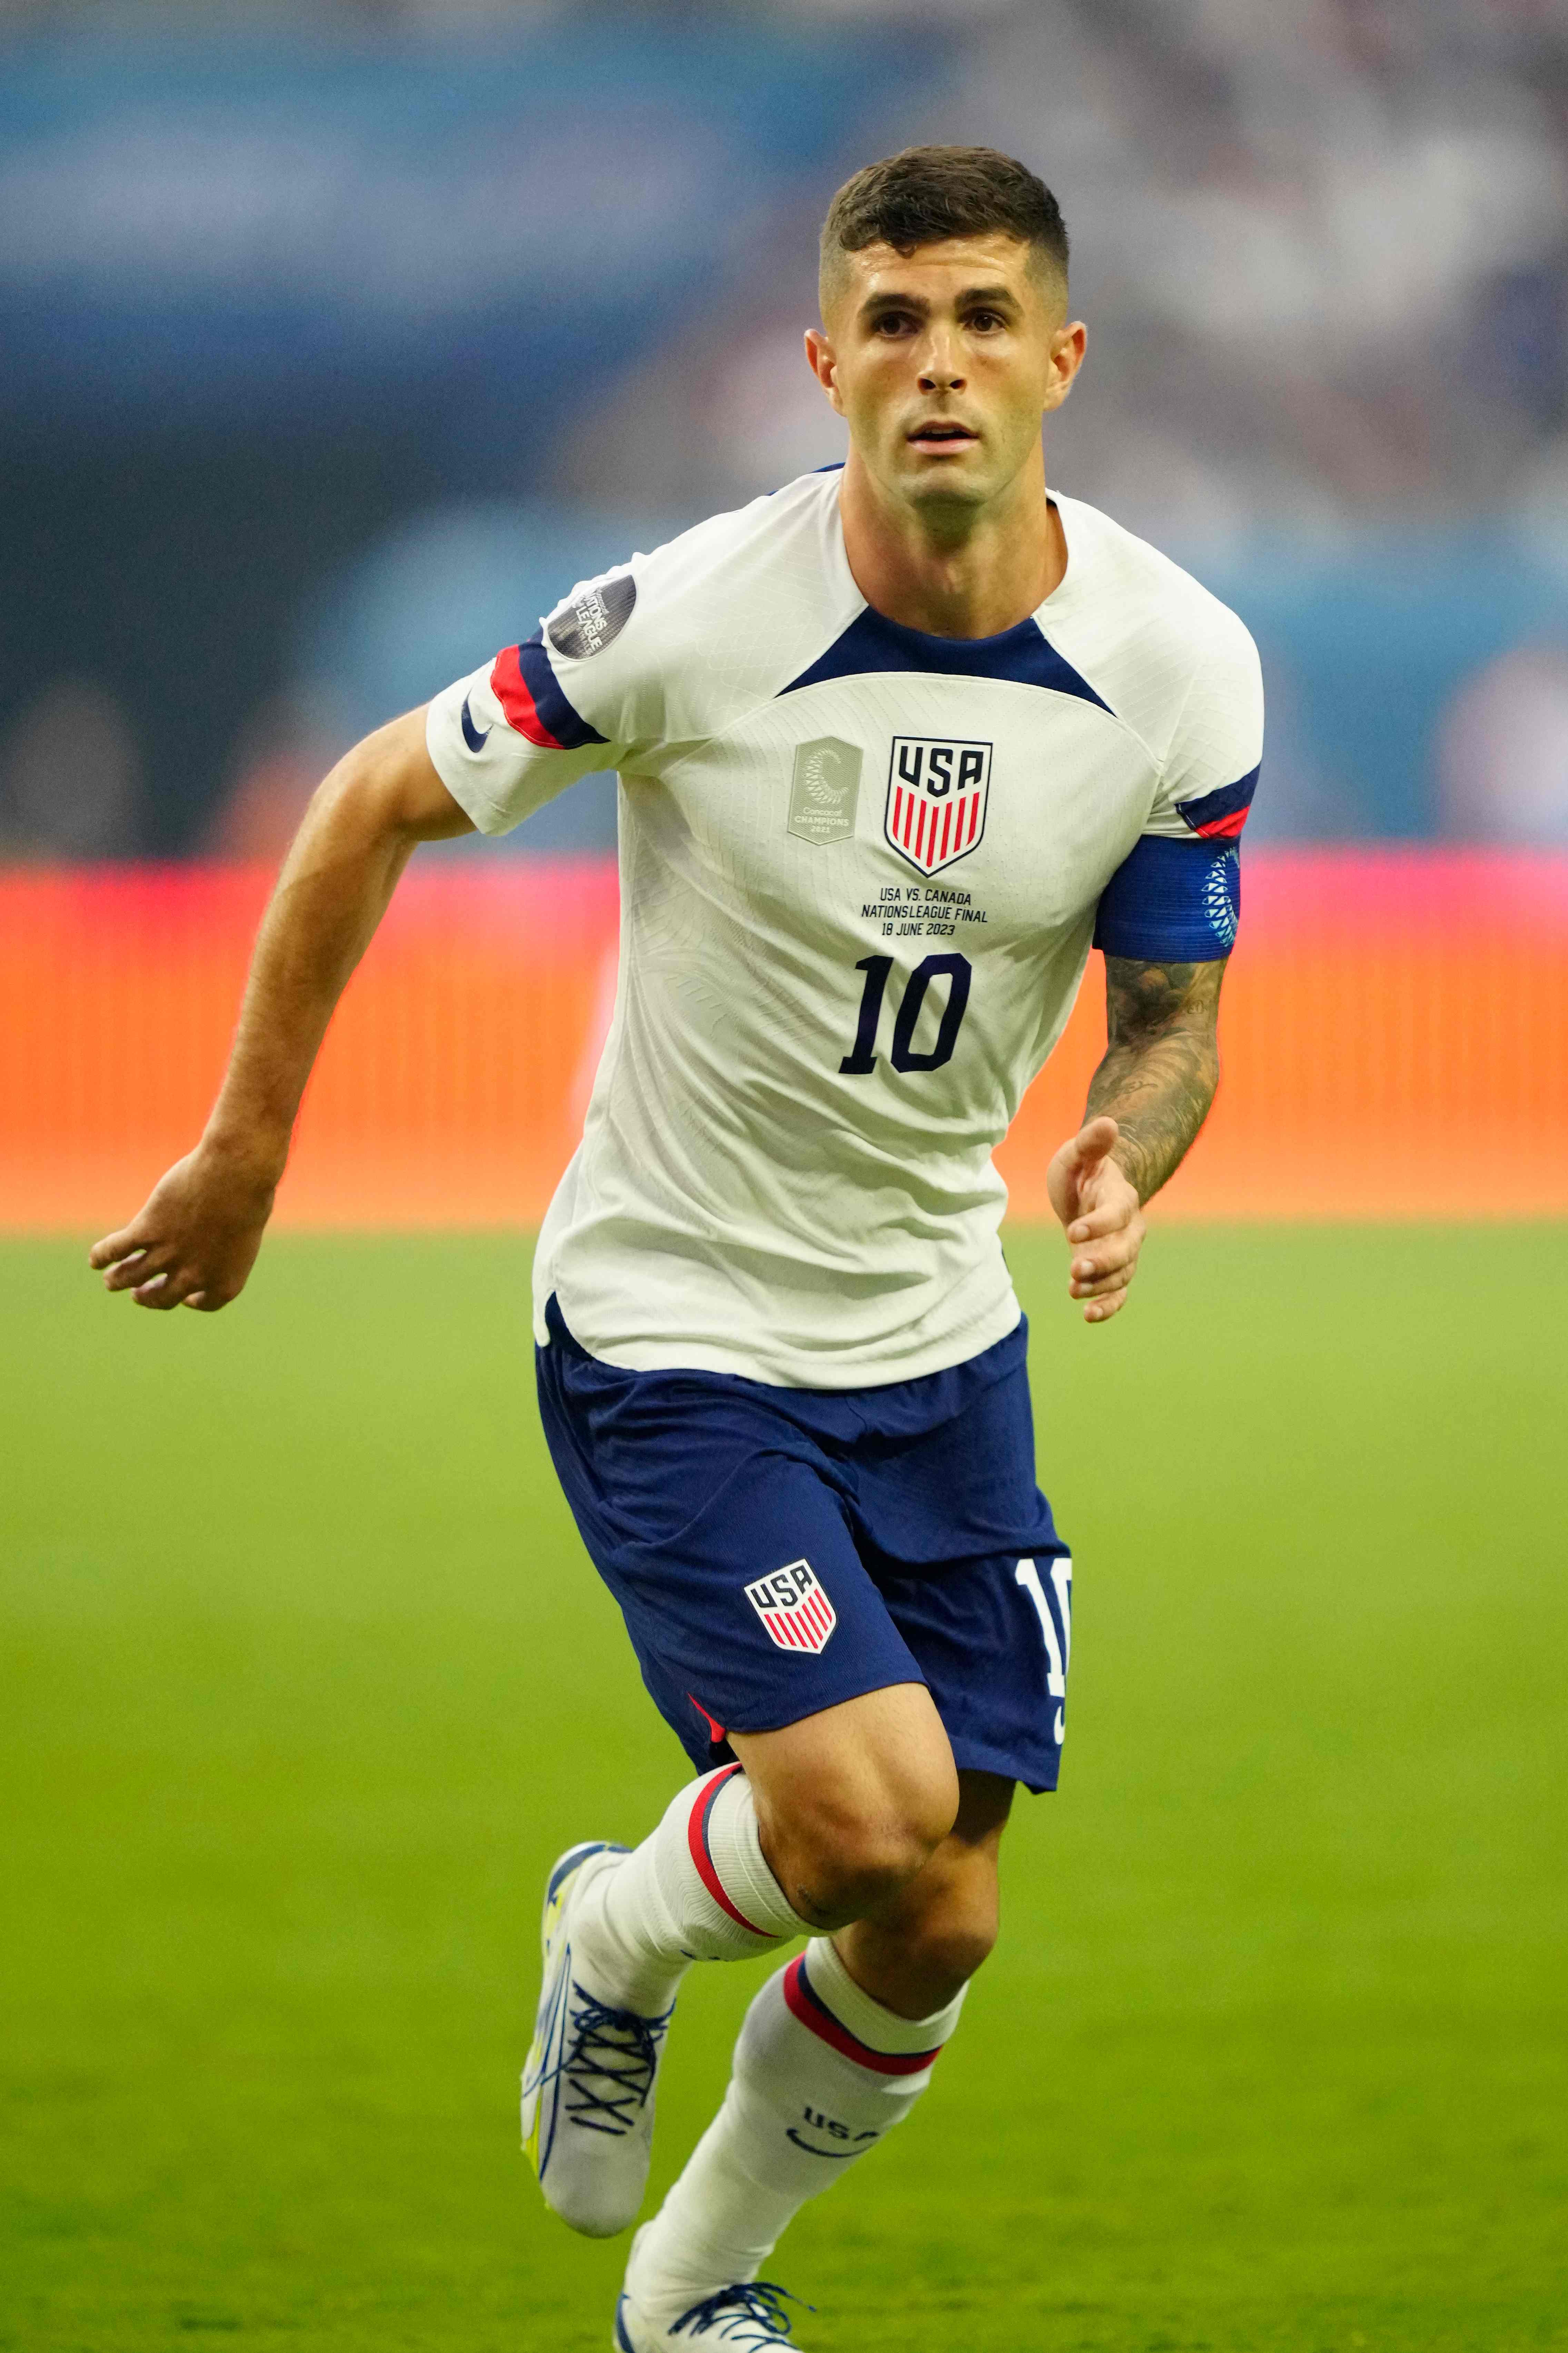 USMNT star Christian Pulisic reveals how Milan will approach must